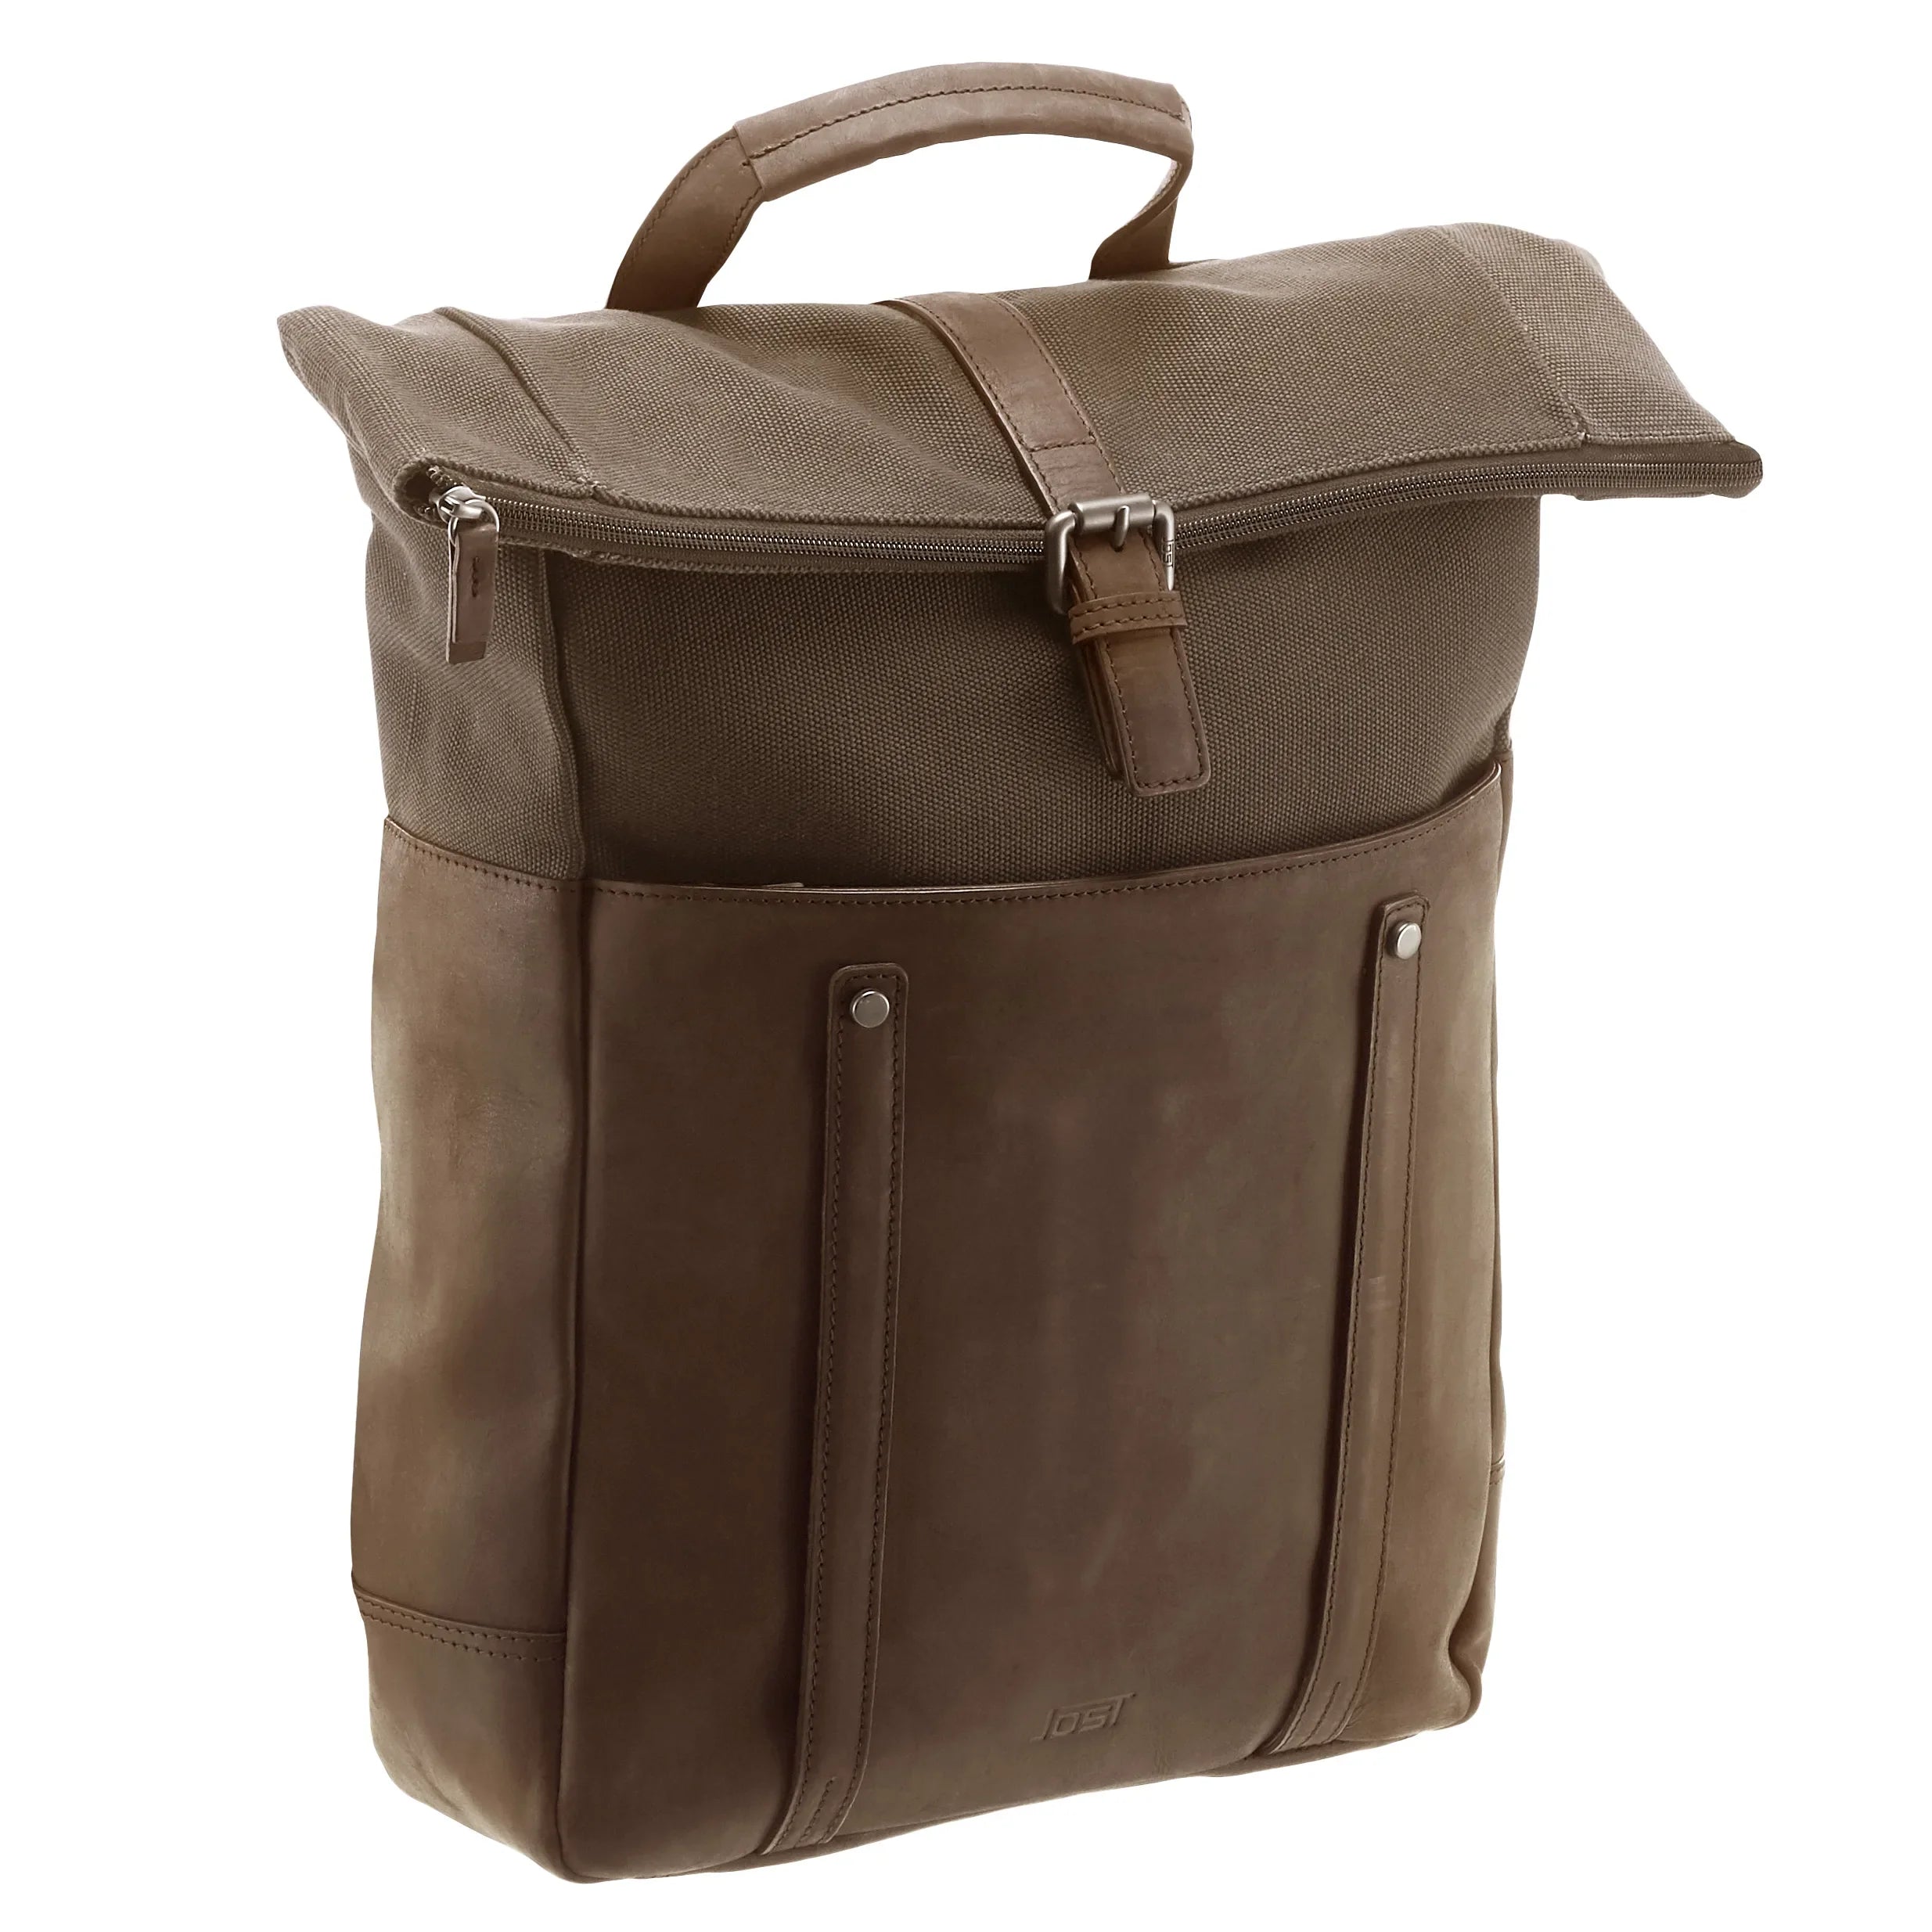 Jost Salo courier backpack 42 cm - brown